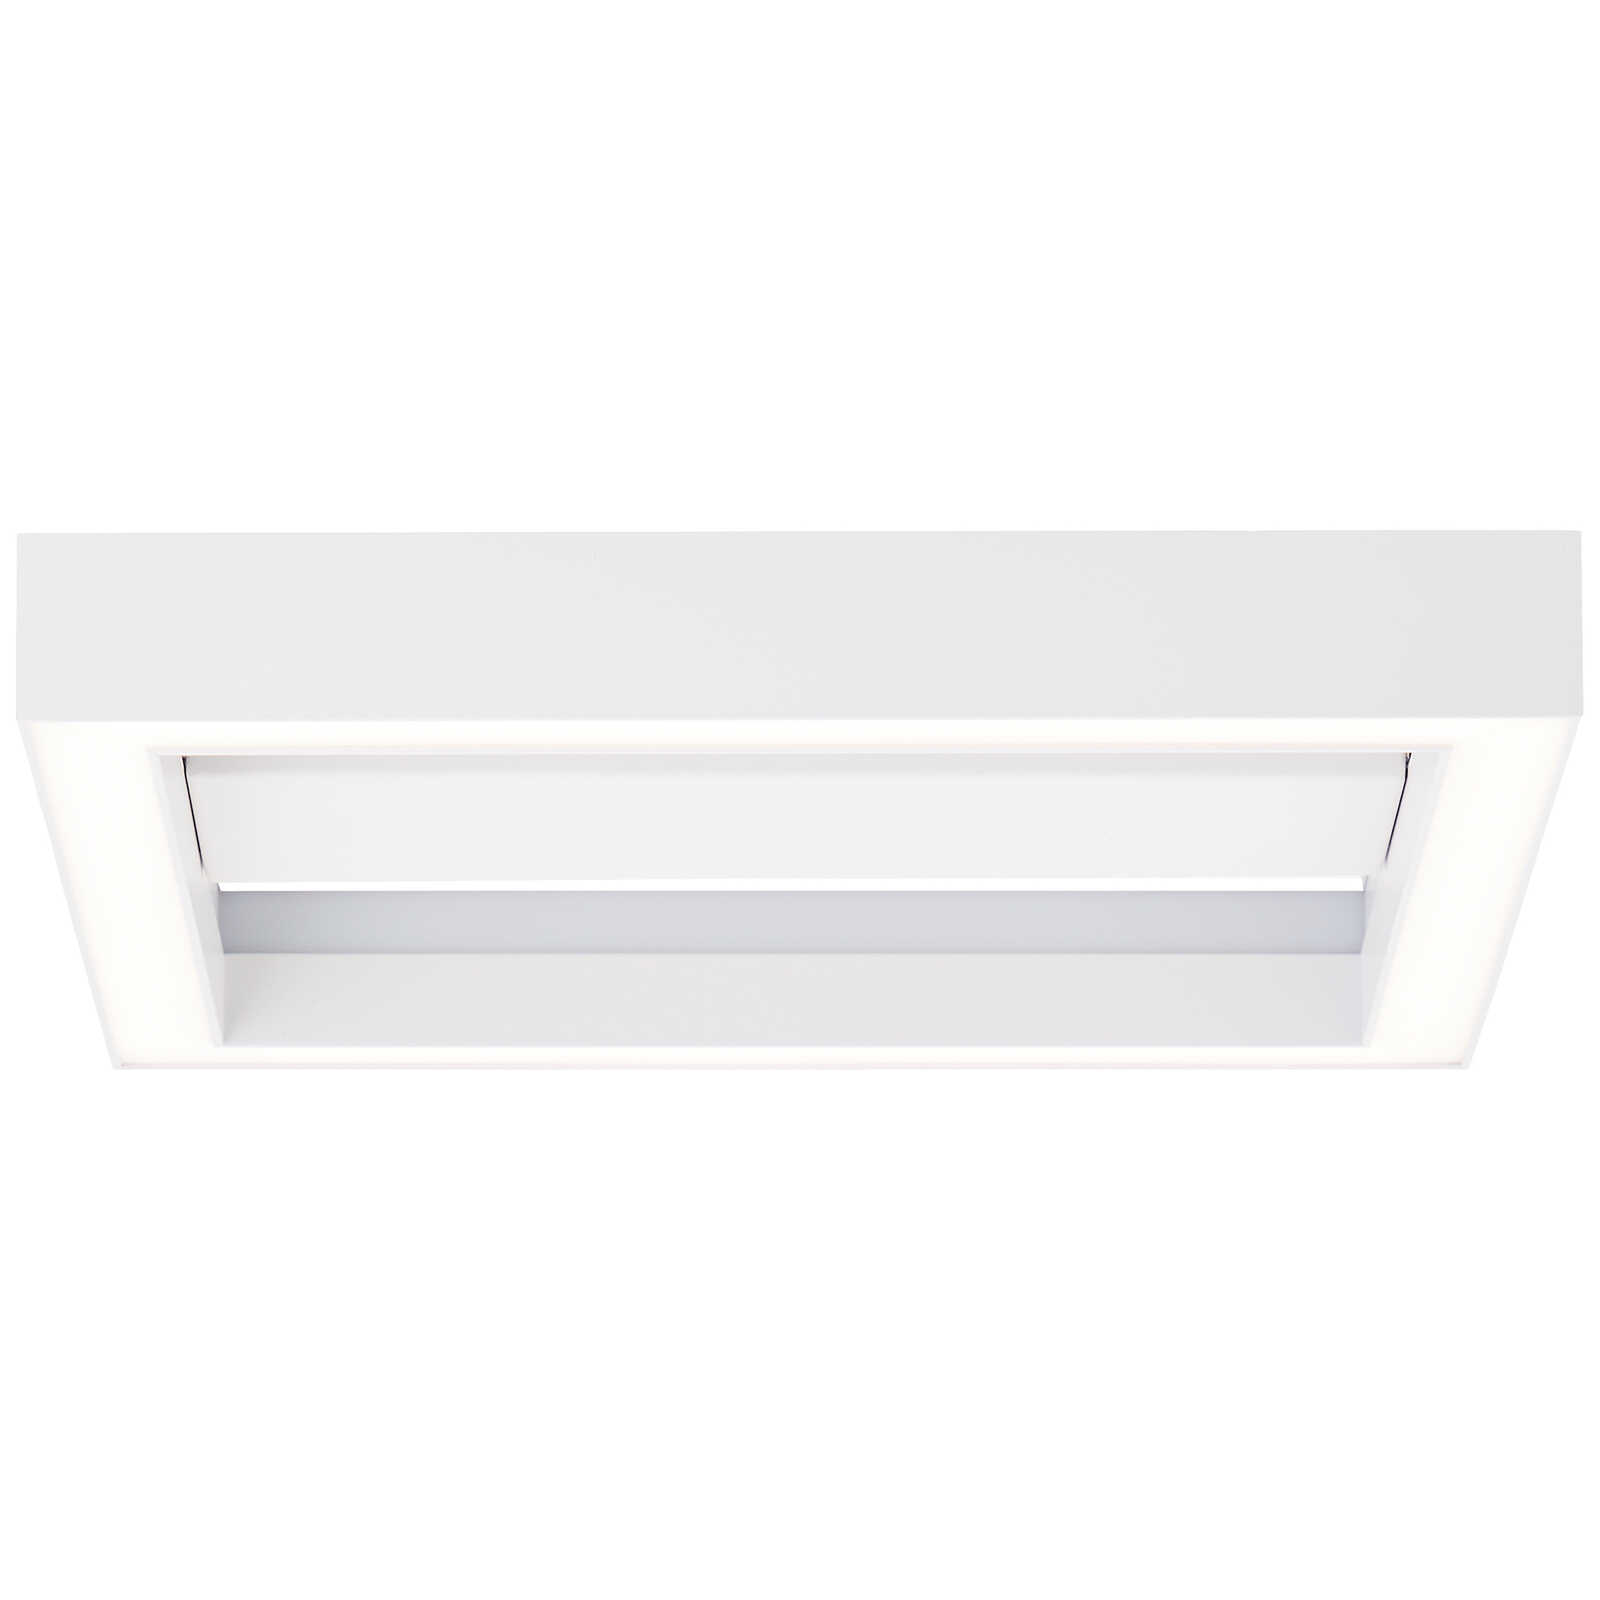             Plastic wall and ceiling light - Janis 1 - White
        